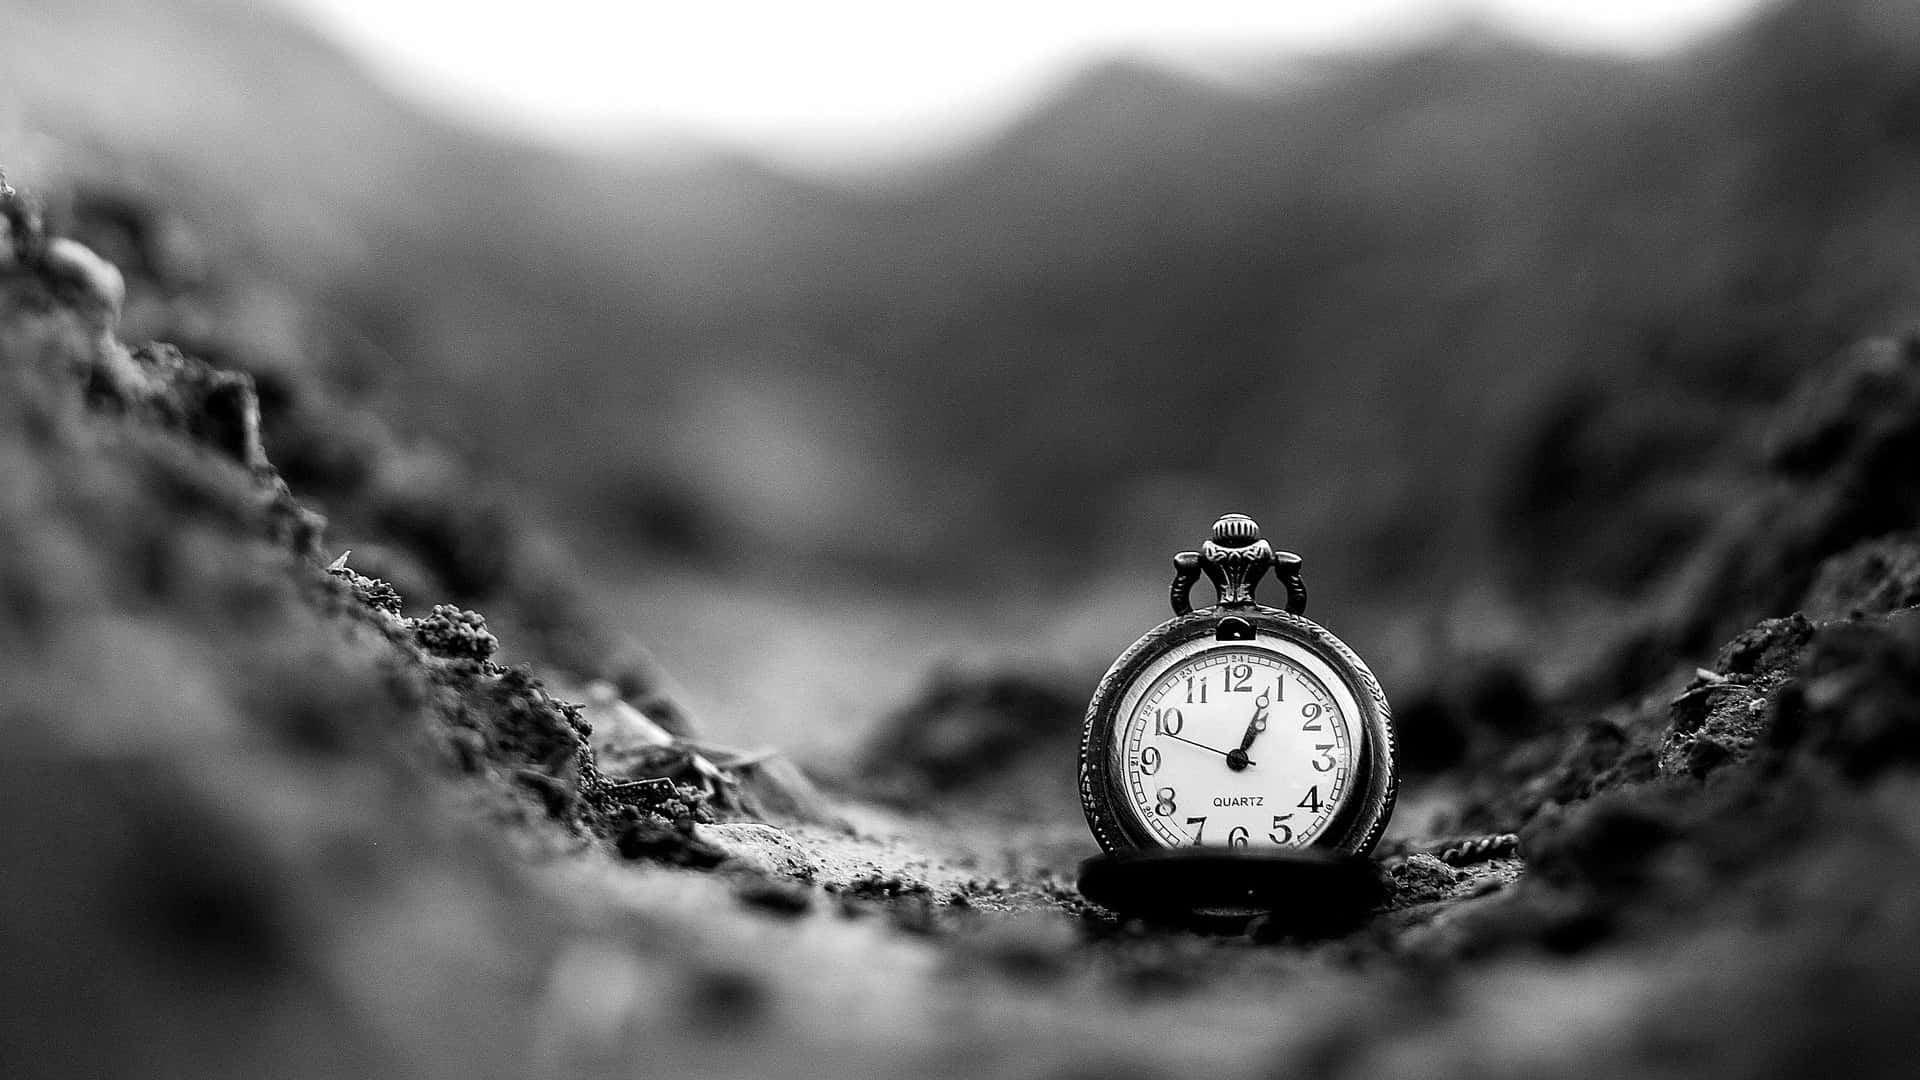 A Black And White Photograph Of A Pocket Watch In The Dirt